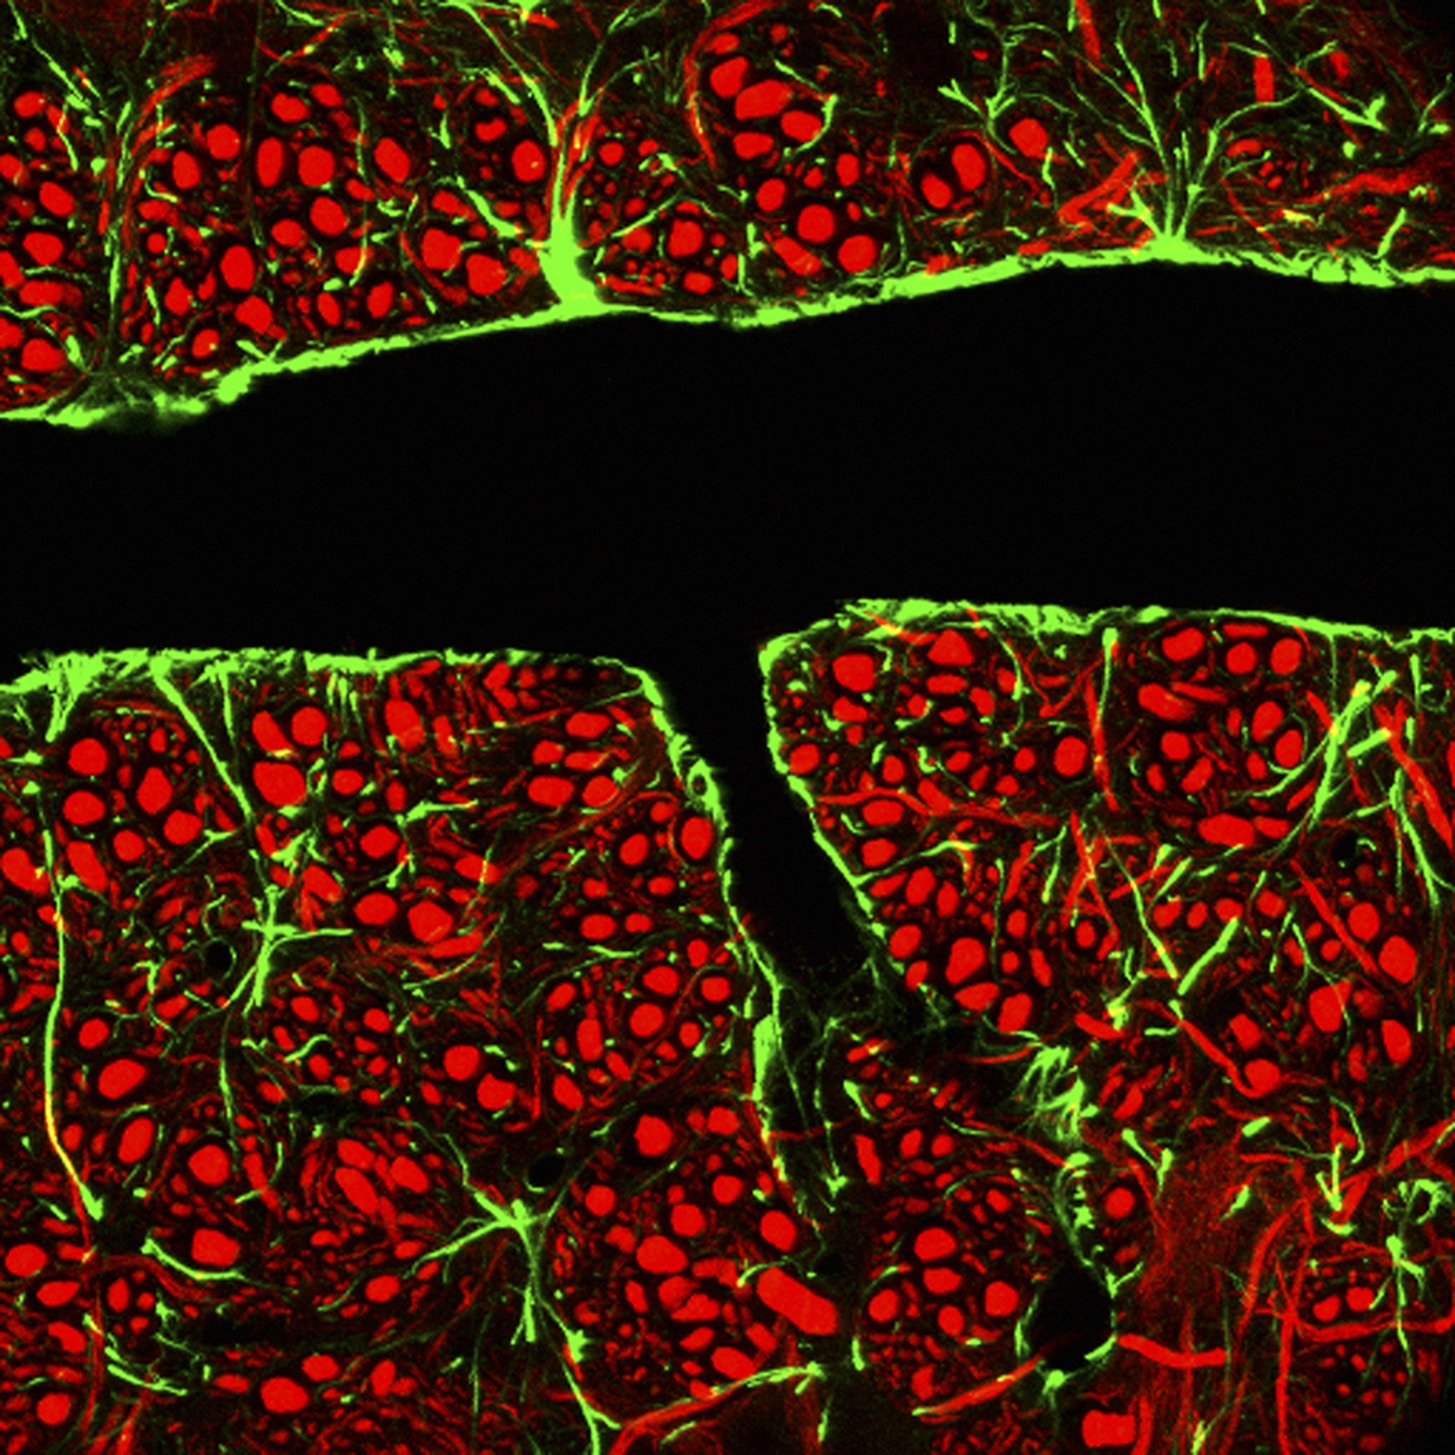 Searching for the Secret of How Young Blood Rejuvenates the Brain